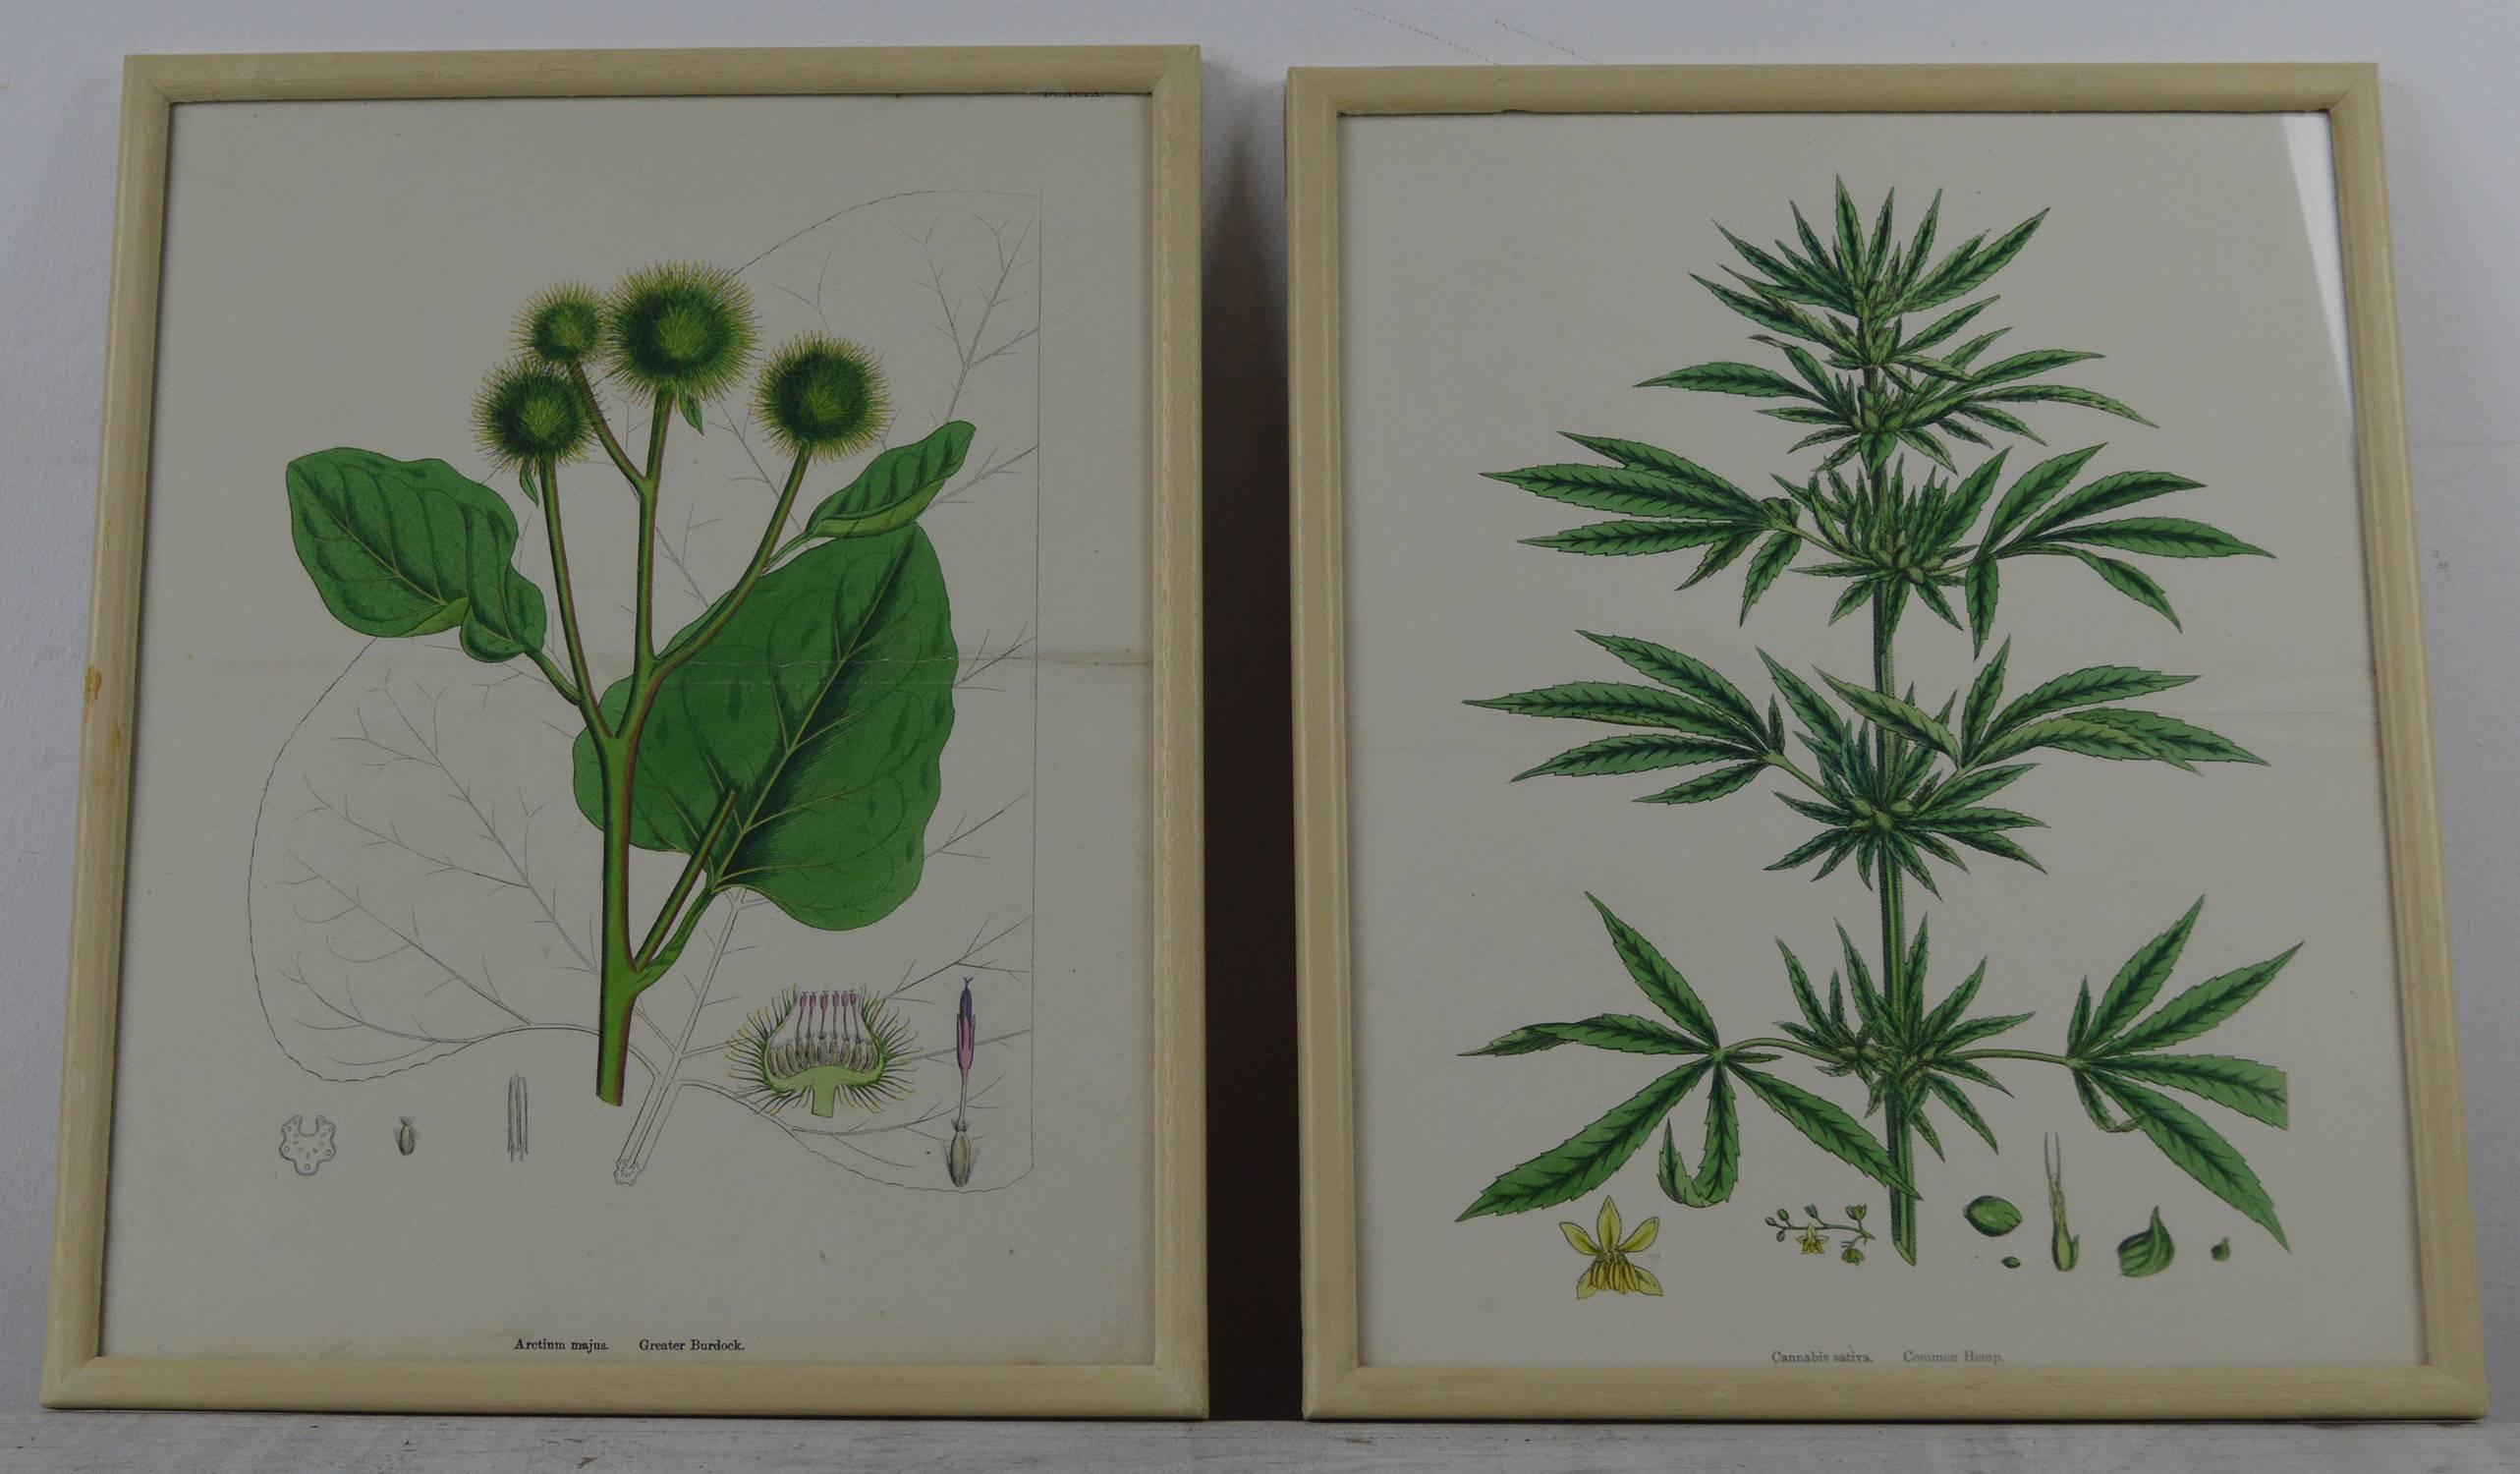 Six beautiful botanical studies using amazing colors.

Originally drawn by the celebrated botanist, Hooker working in the 18th century.

Stone lithographs with original color.

Presented in faux ivory painted wood frames.
 